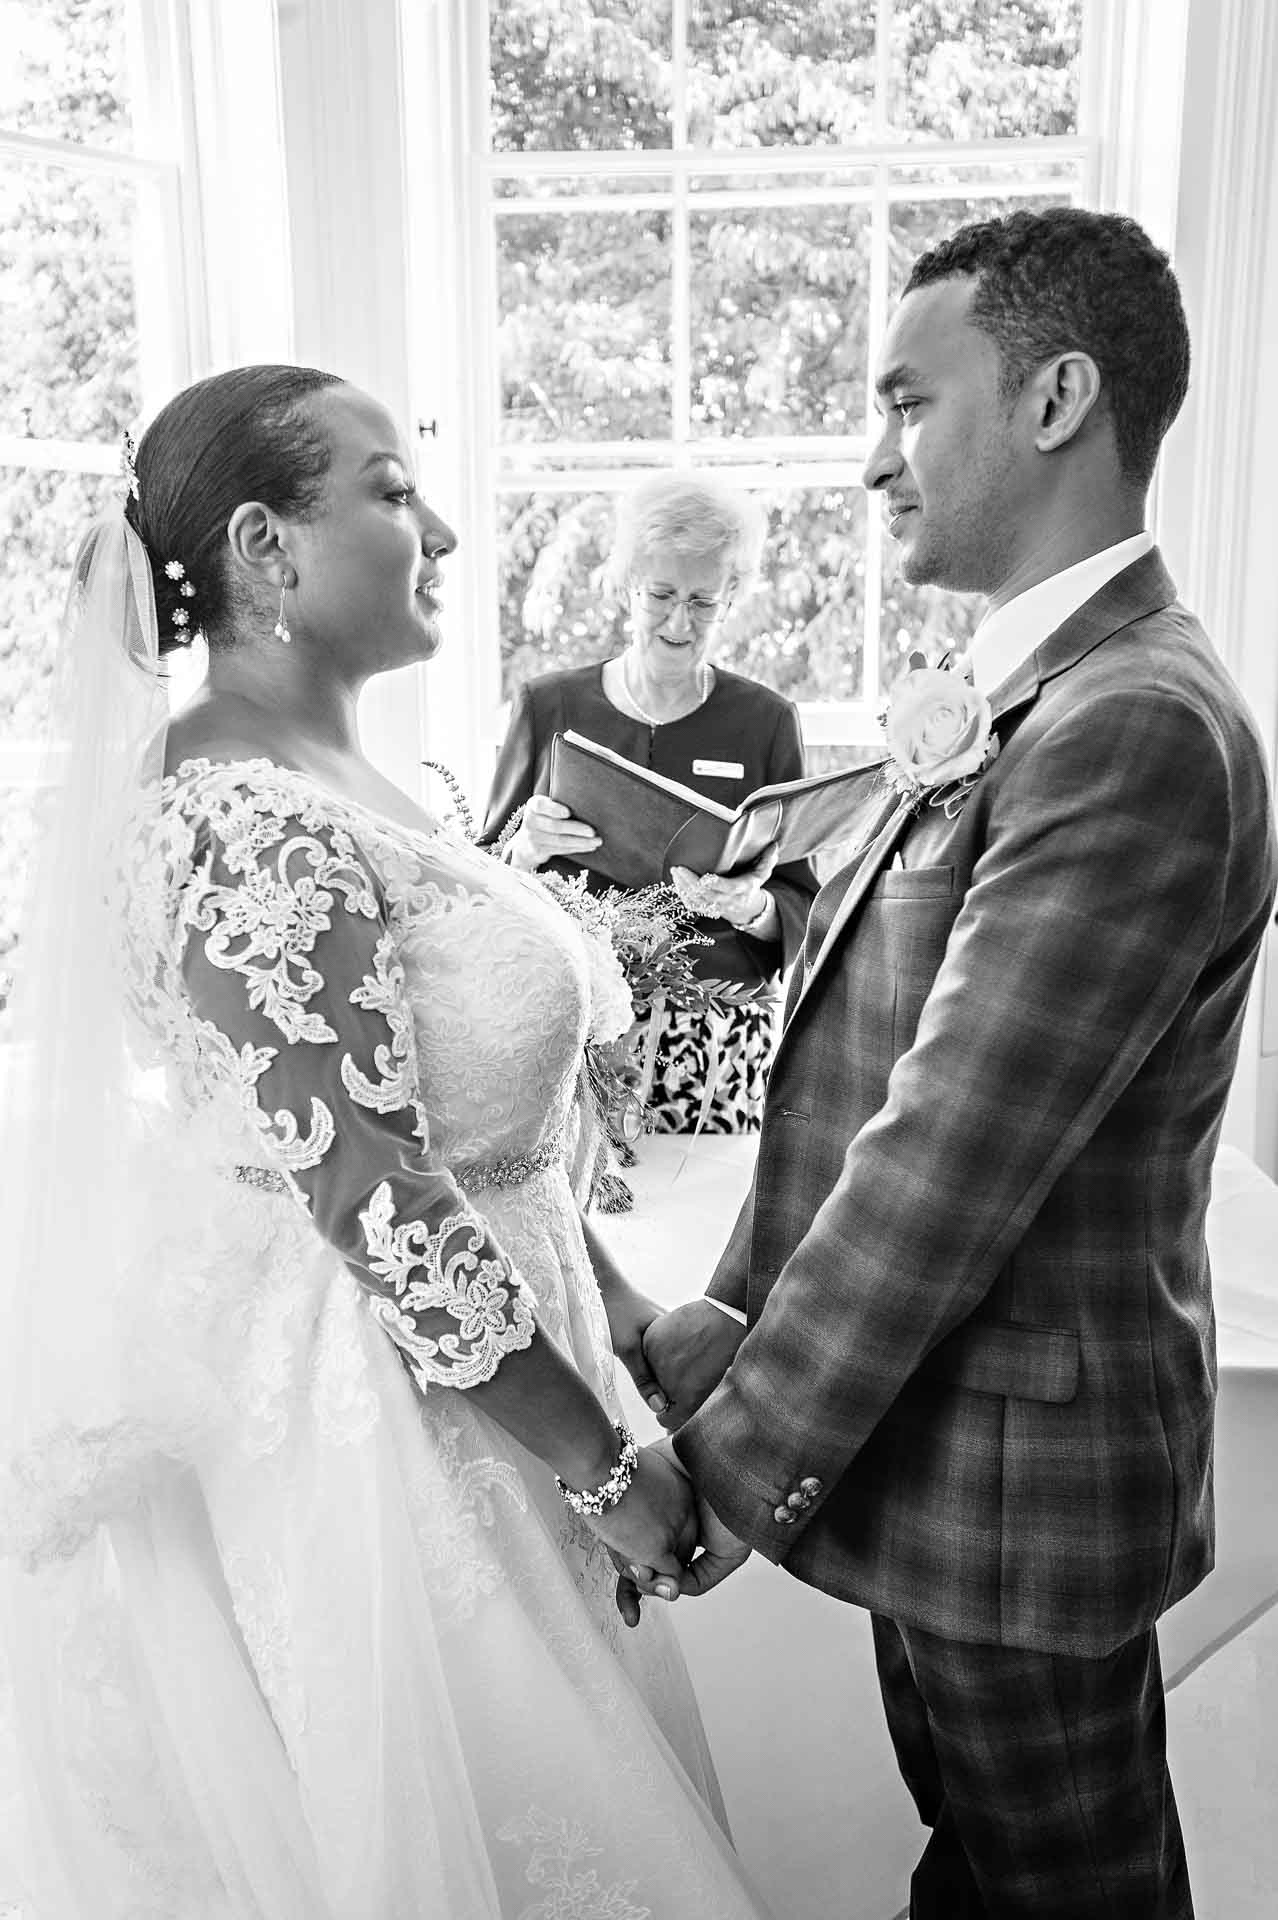 Wedding Vows at Pembroke Lodge in Black and White